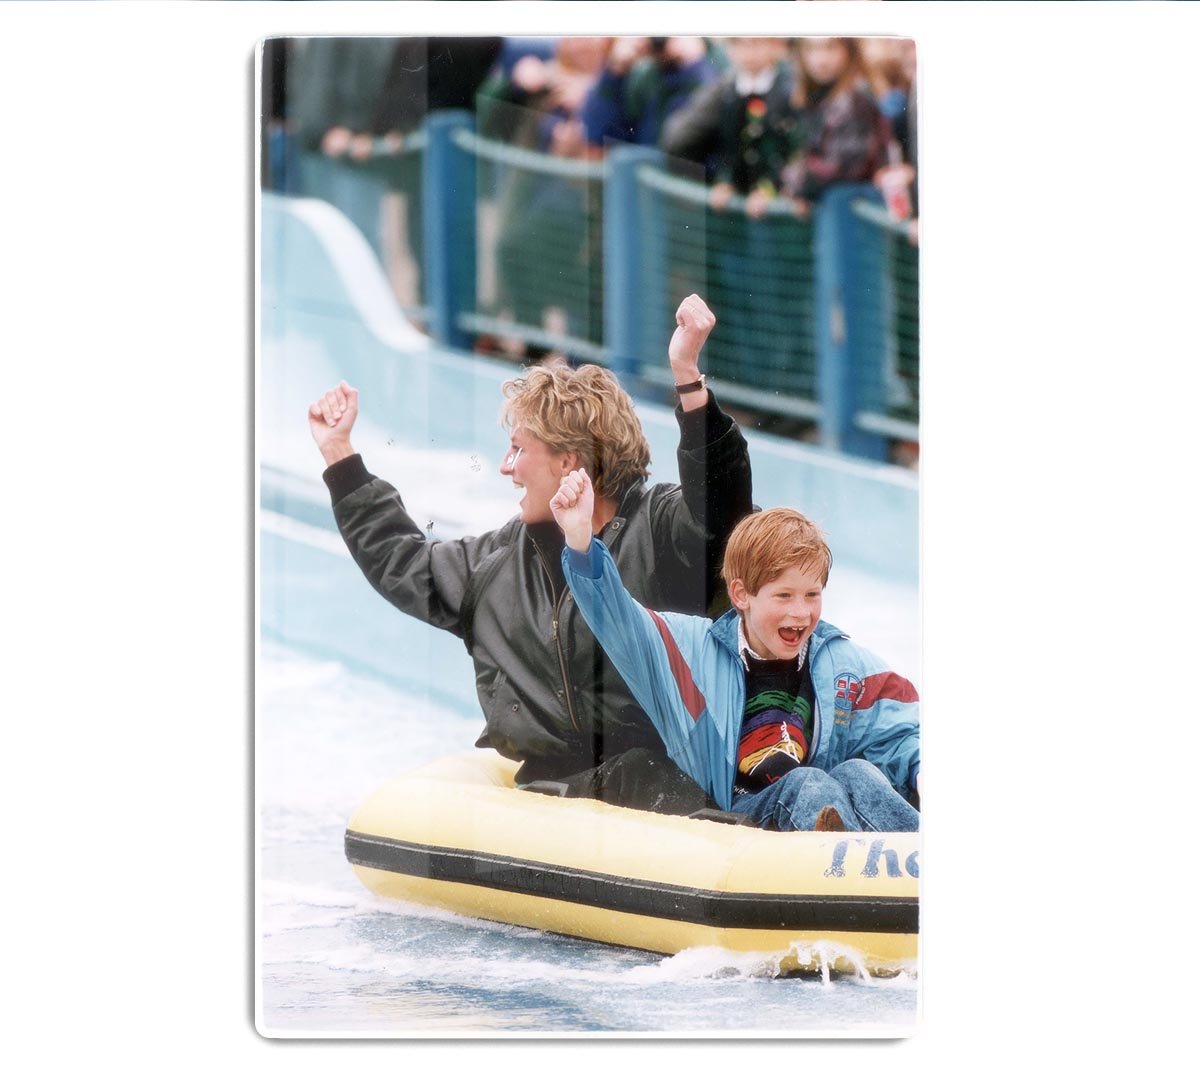 Princess Diana with Prince Harry on a water ride HD Metal Print